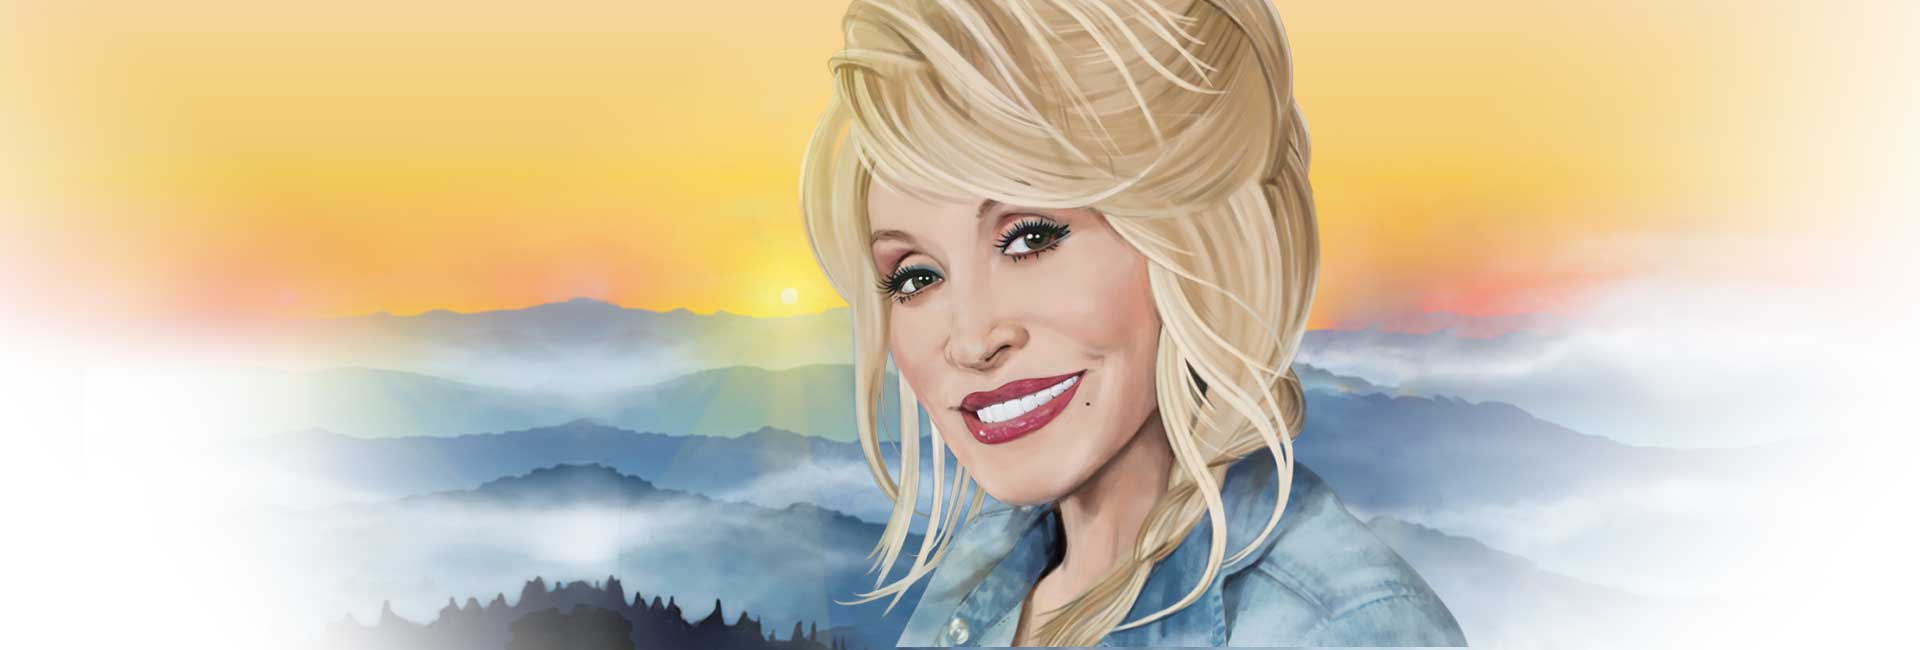 Dolly Parton Life of a Living Legend